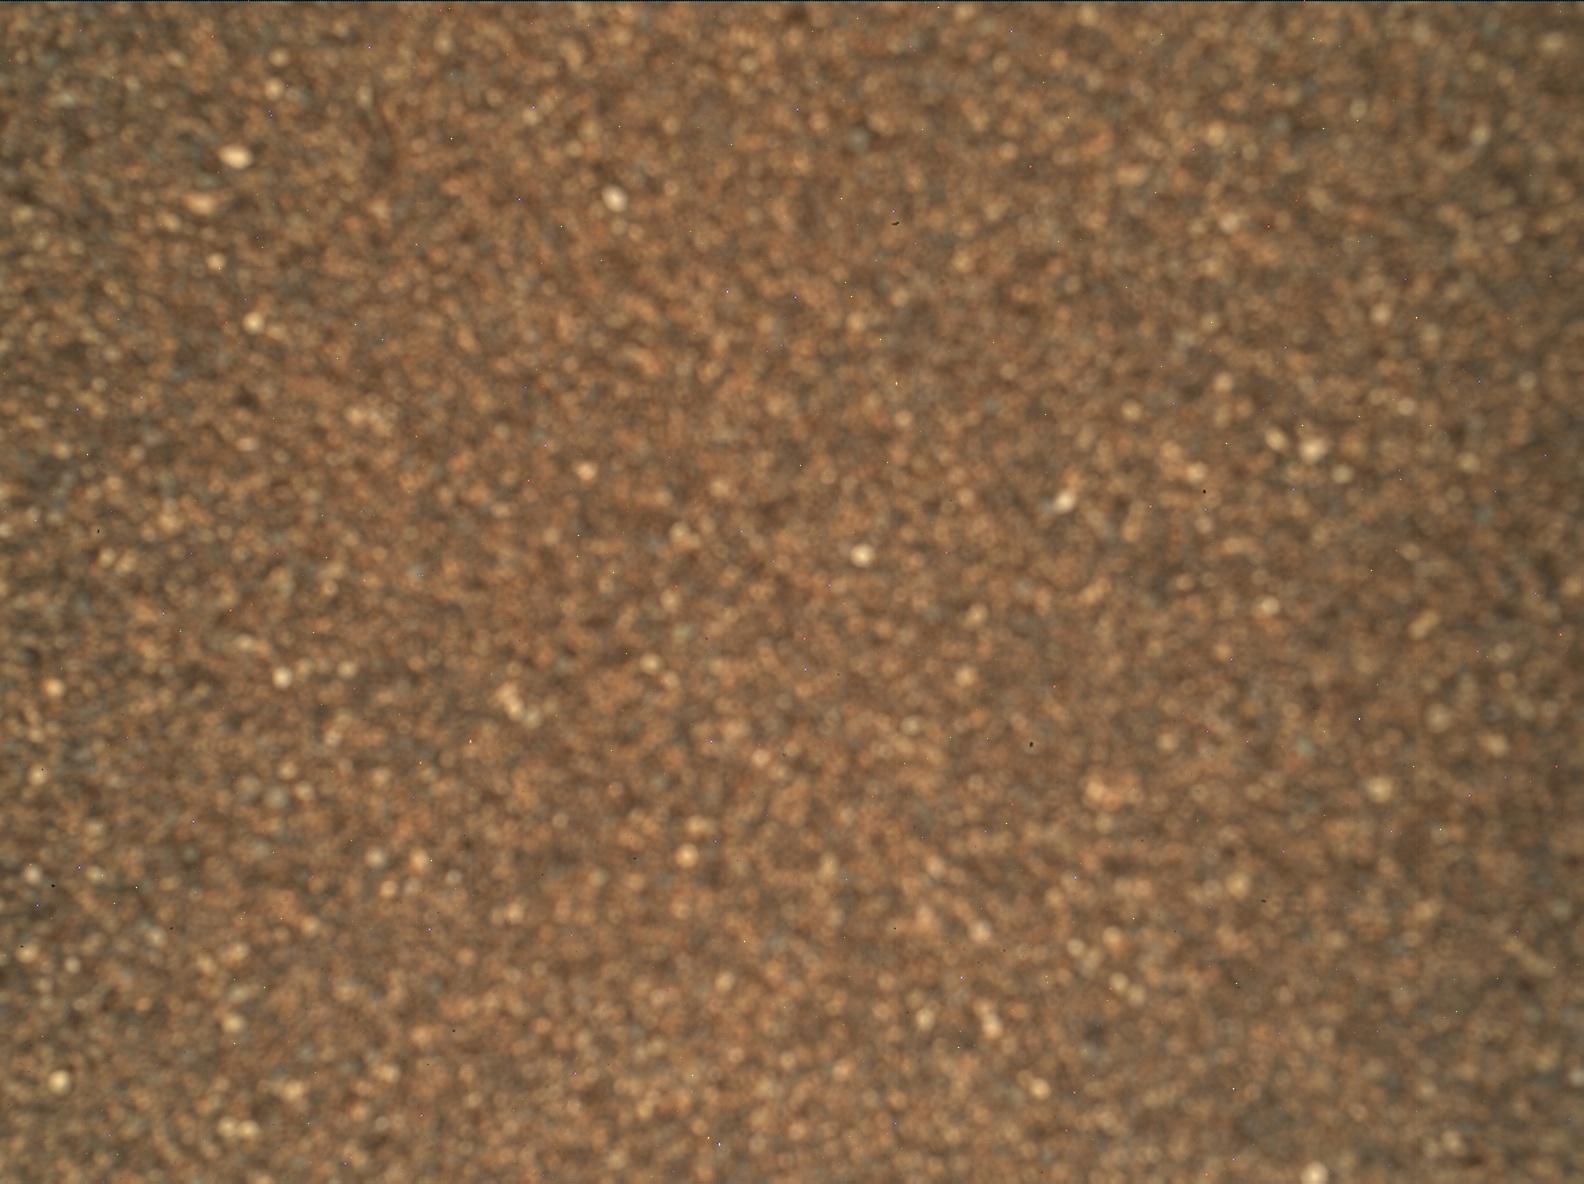 Nasa's Mars rover Curiosity acquired this image using its Mars Hand Lens Imager (MAHLI) on Sol 2027